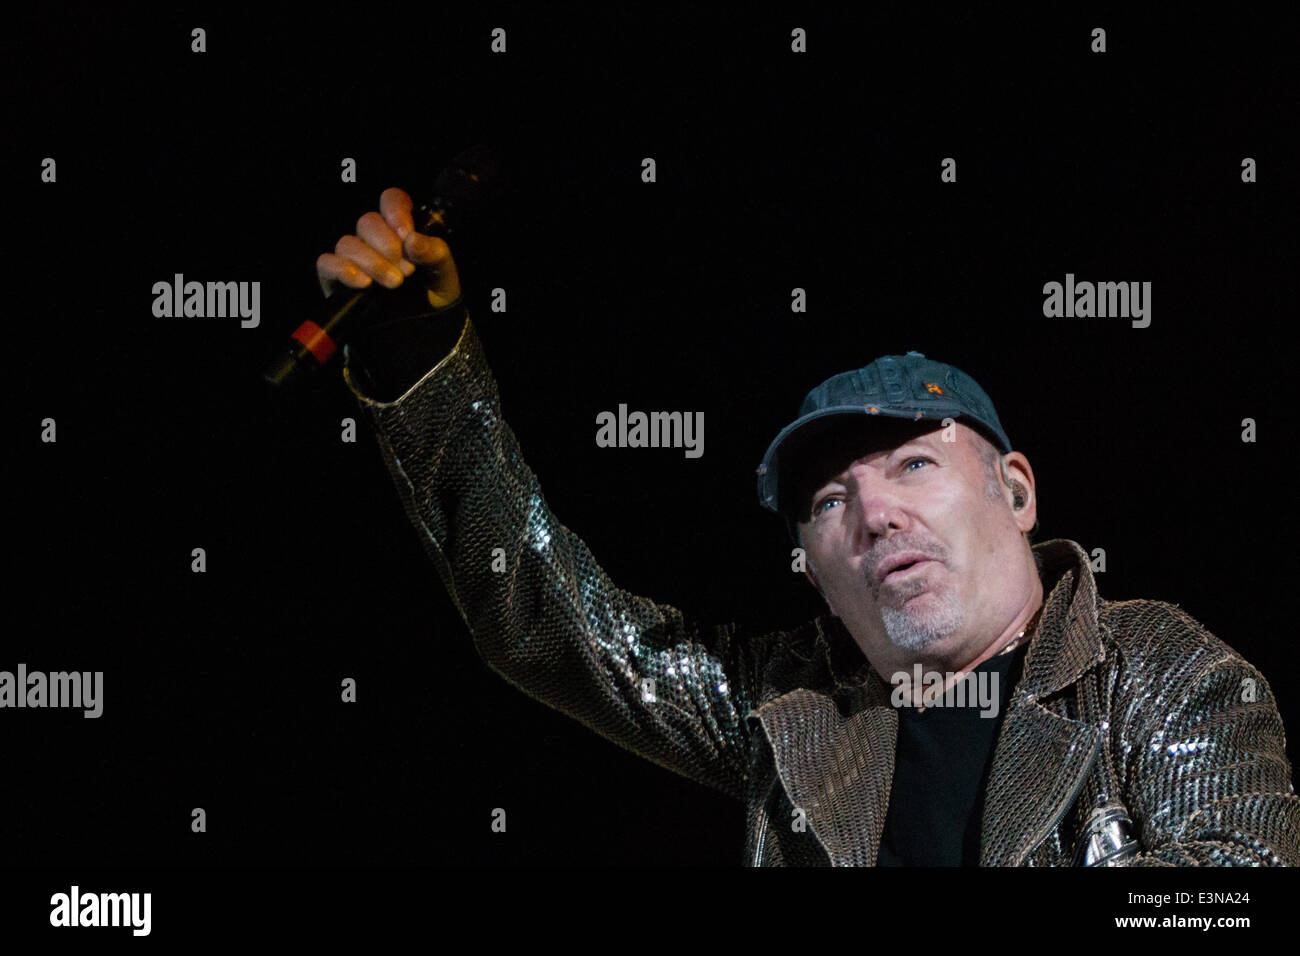 Rome, Italy. 25th June, 2014. Italian singer Vasco Rossi performs on stage during his concert at Rome's Olympic stadium, Italy, 25 June 2014. The concert signs the start of his Live Kom 014's tour. Credit:  Luigi Orru/NurPhoto/ZUMAPRESS.com/Alamy Live News Stock Photo